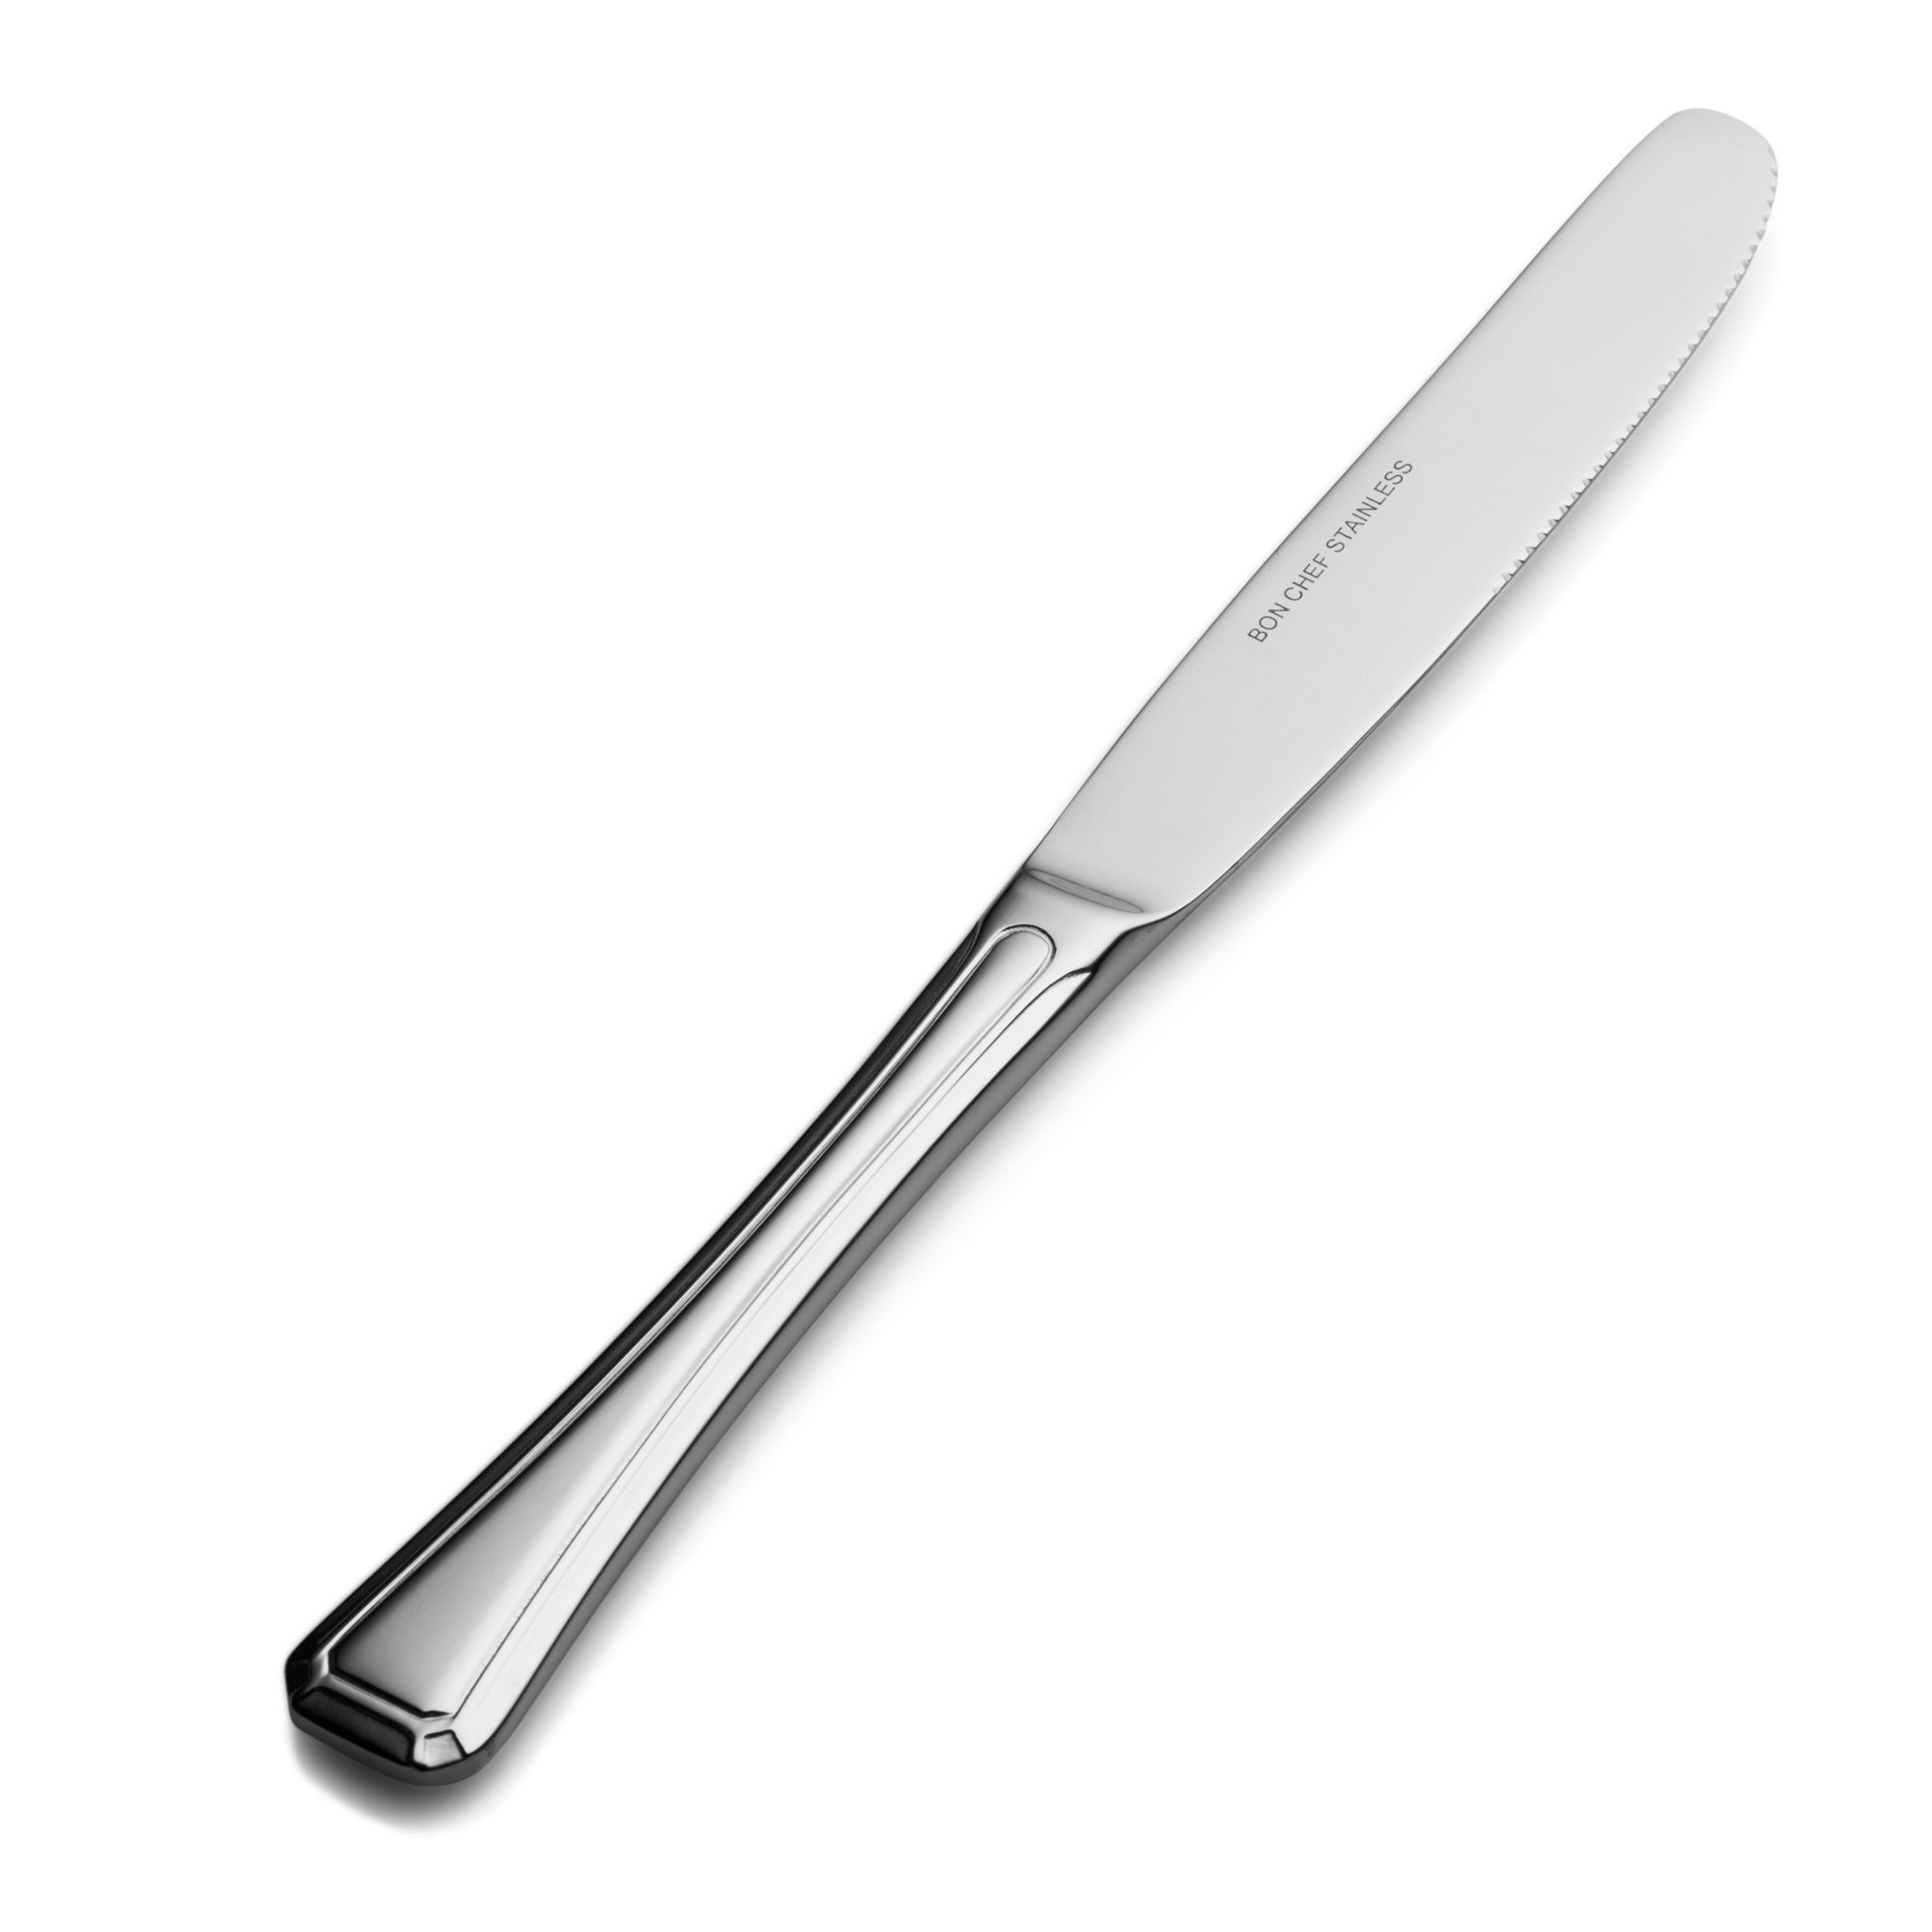 Bon Chef S514 Prism 18/8 Stainless Steel European Hollow Handle Dinner Knife